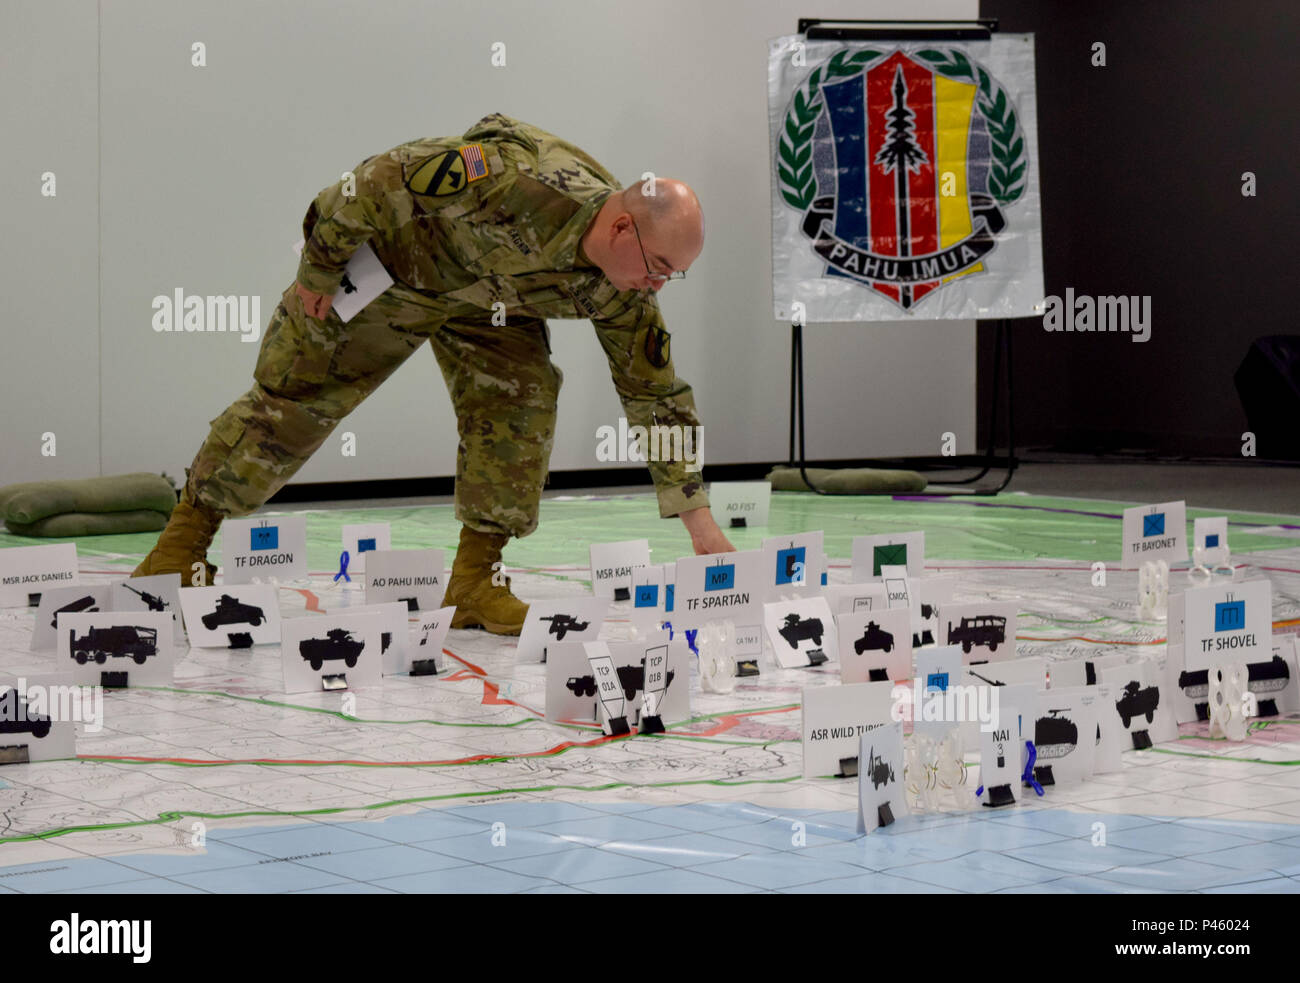 Sgt. 1st Class Michael Gagnon, senior supply sergeant, 63rd Brigade Support Battalion, participates in the Combined Arm Rehearsal brief at exercise Imua Dawn 2016, Sagamihara Depot, Japan, June 15, 2016. Imua Dawn16 focuses on maneuver support operations and enhancing cooperative capabilities in mobility, humanitarian assistance and disaster relief, noncombatant evacuation operations, and sustainment support in the event of natural disasters and other crises that threaten public safety and health. Stock Photo